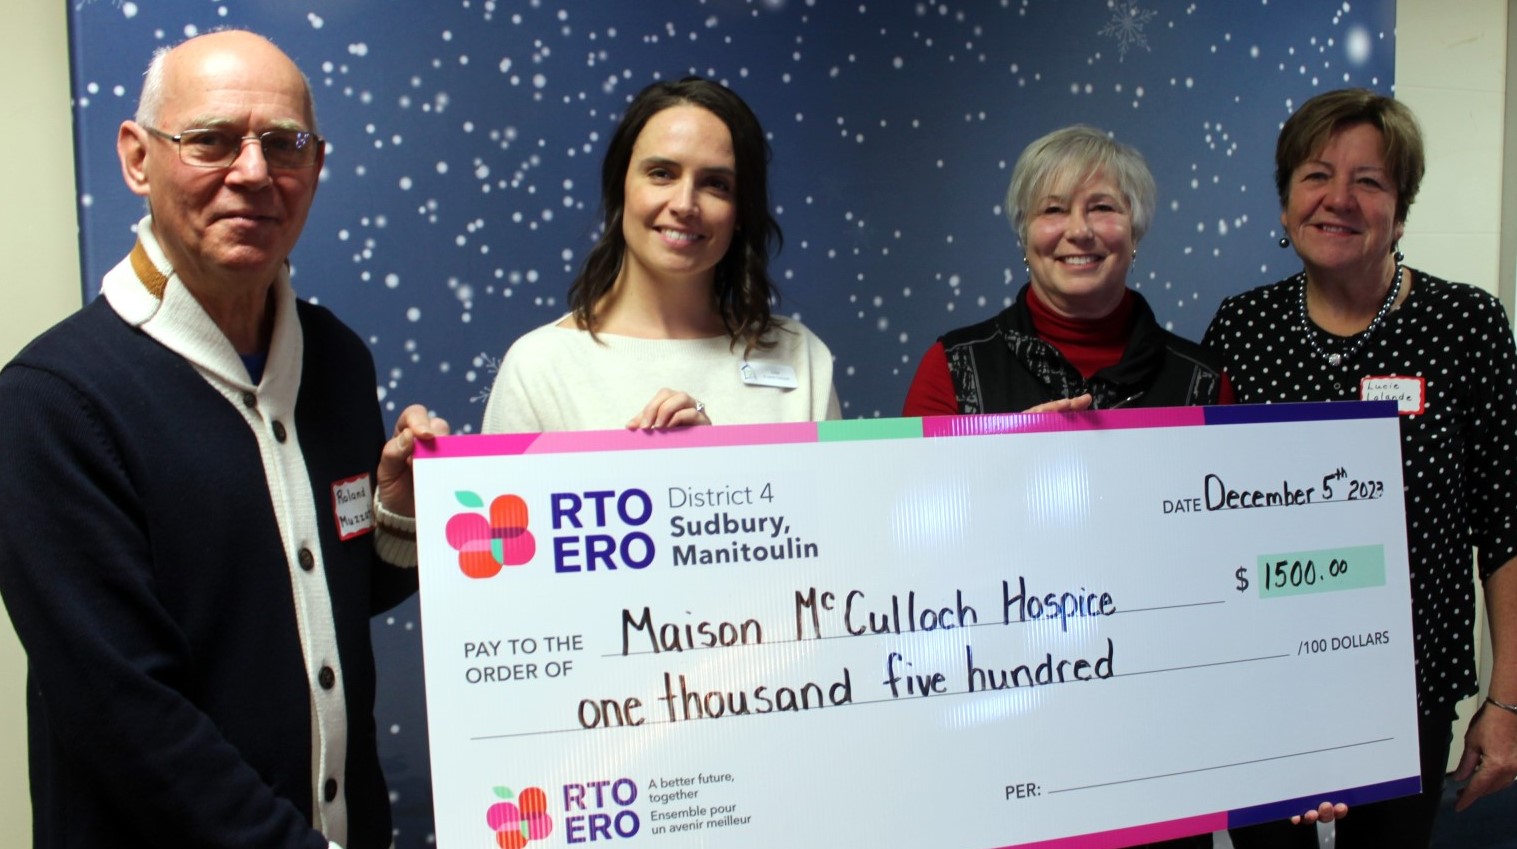 Donation to Maison McCulloch Hospice